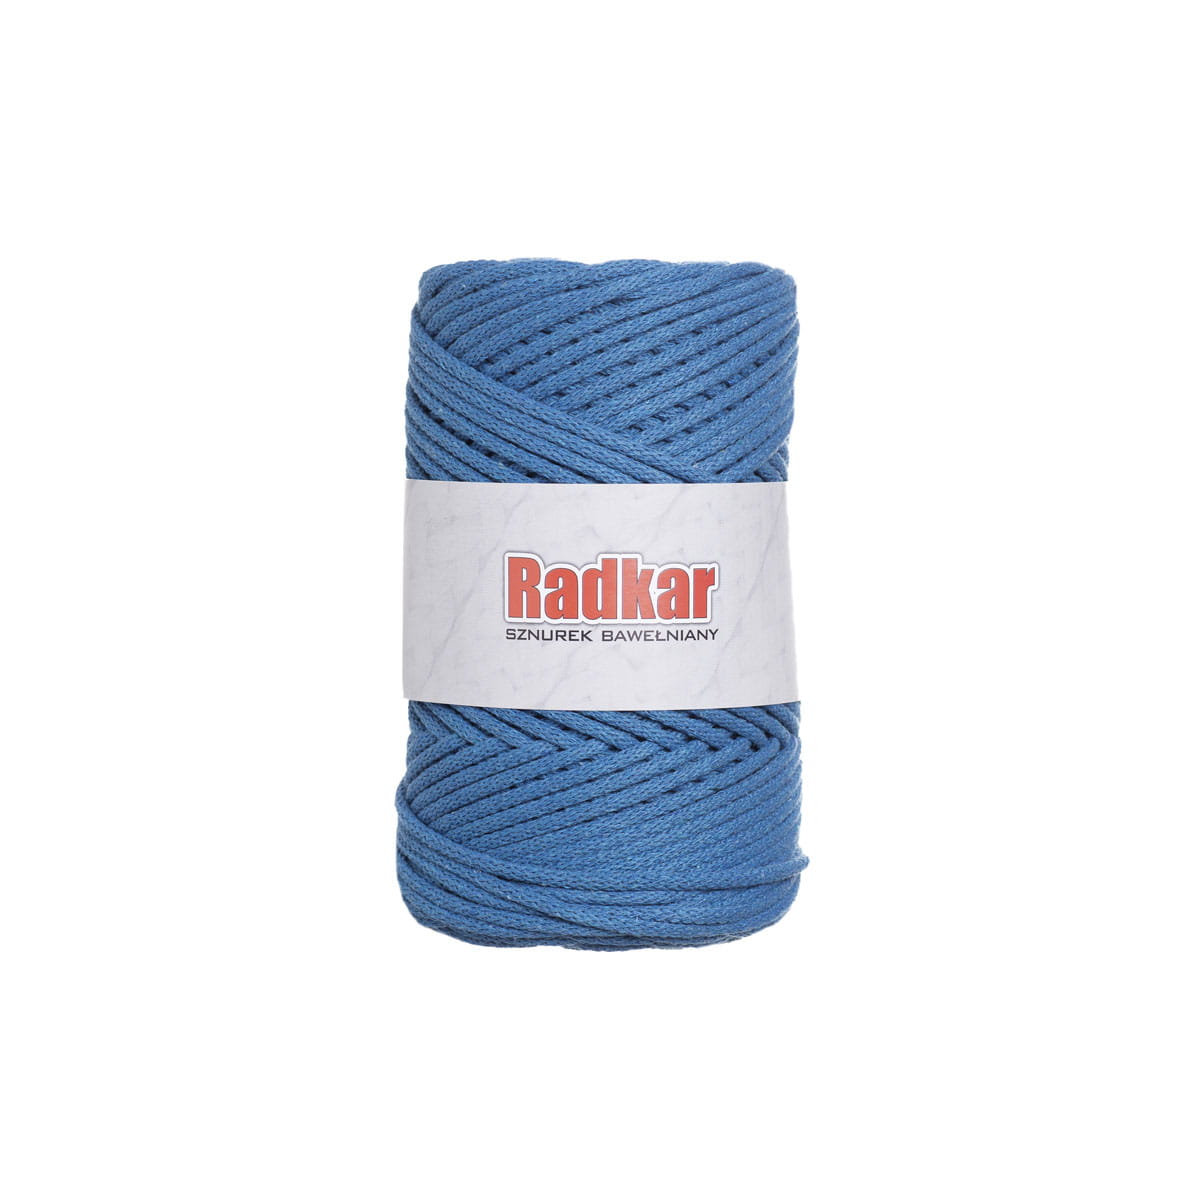 Turquoise 430 3mm cotton cord